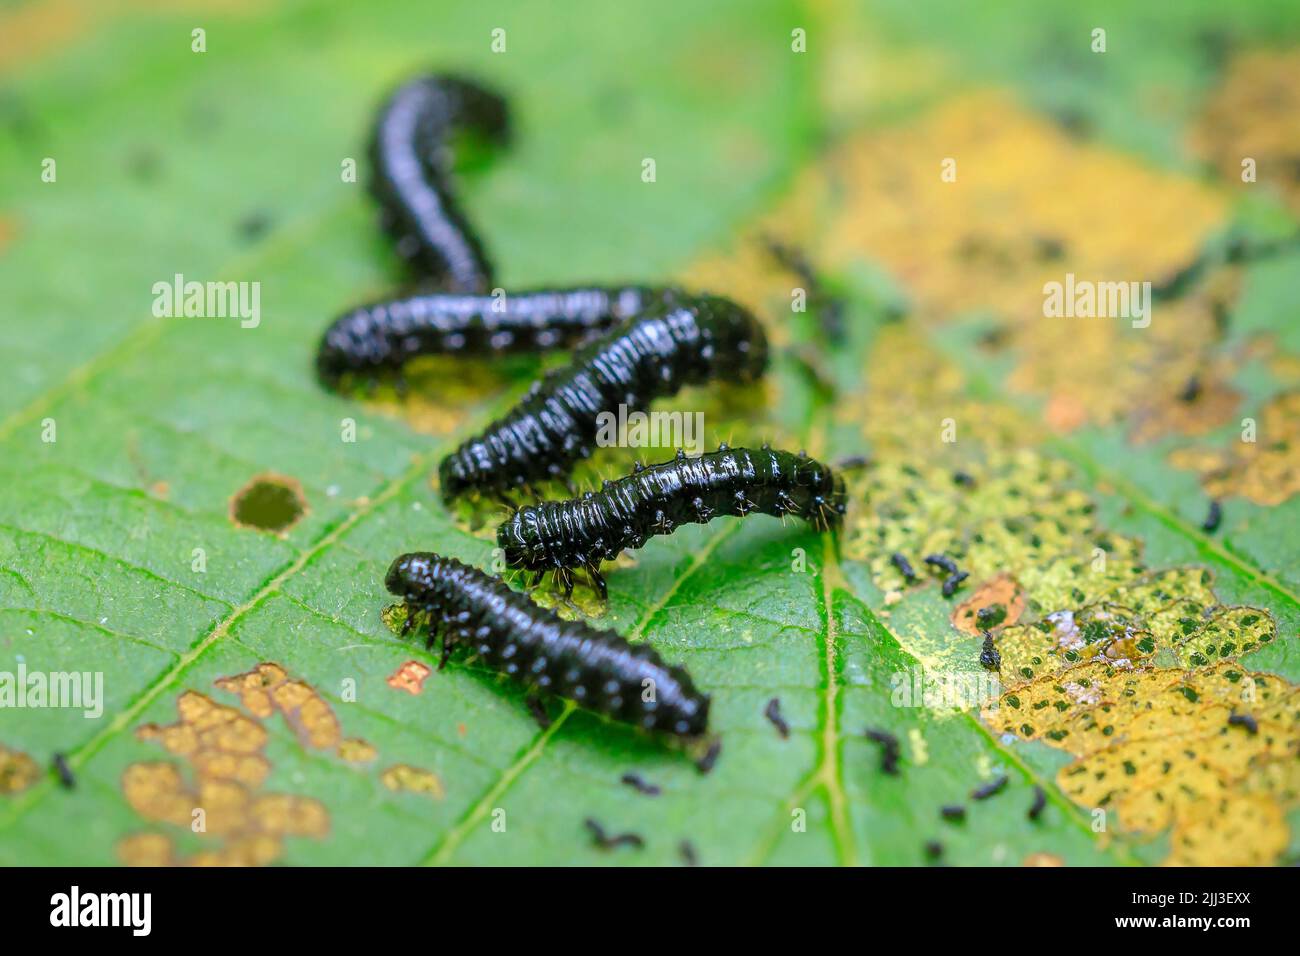 Closeup of a small alder leaf beetle, agelastica alni, caterpillar climbing up on green grass and reeds on a summer day. Stock Photo